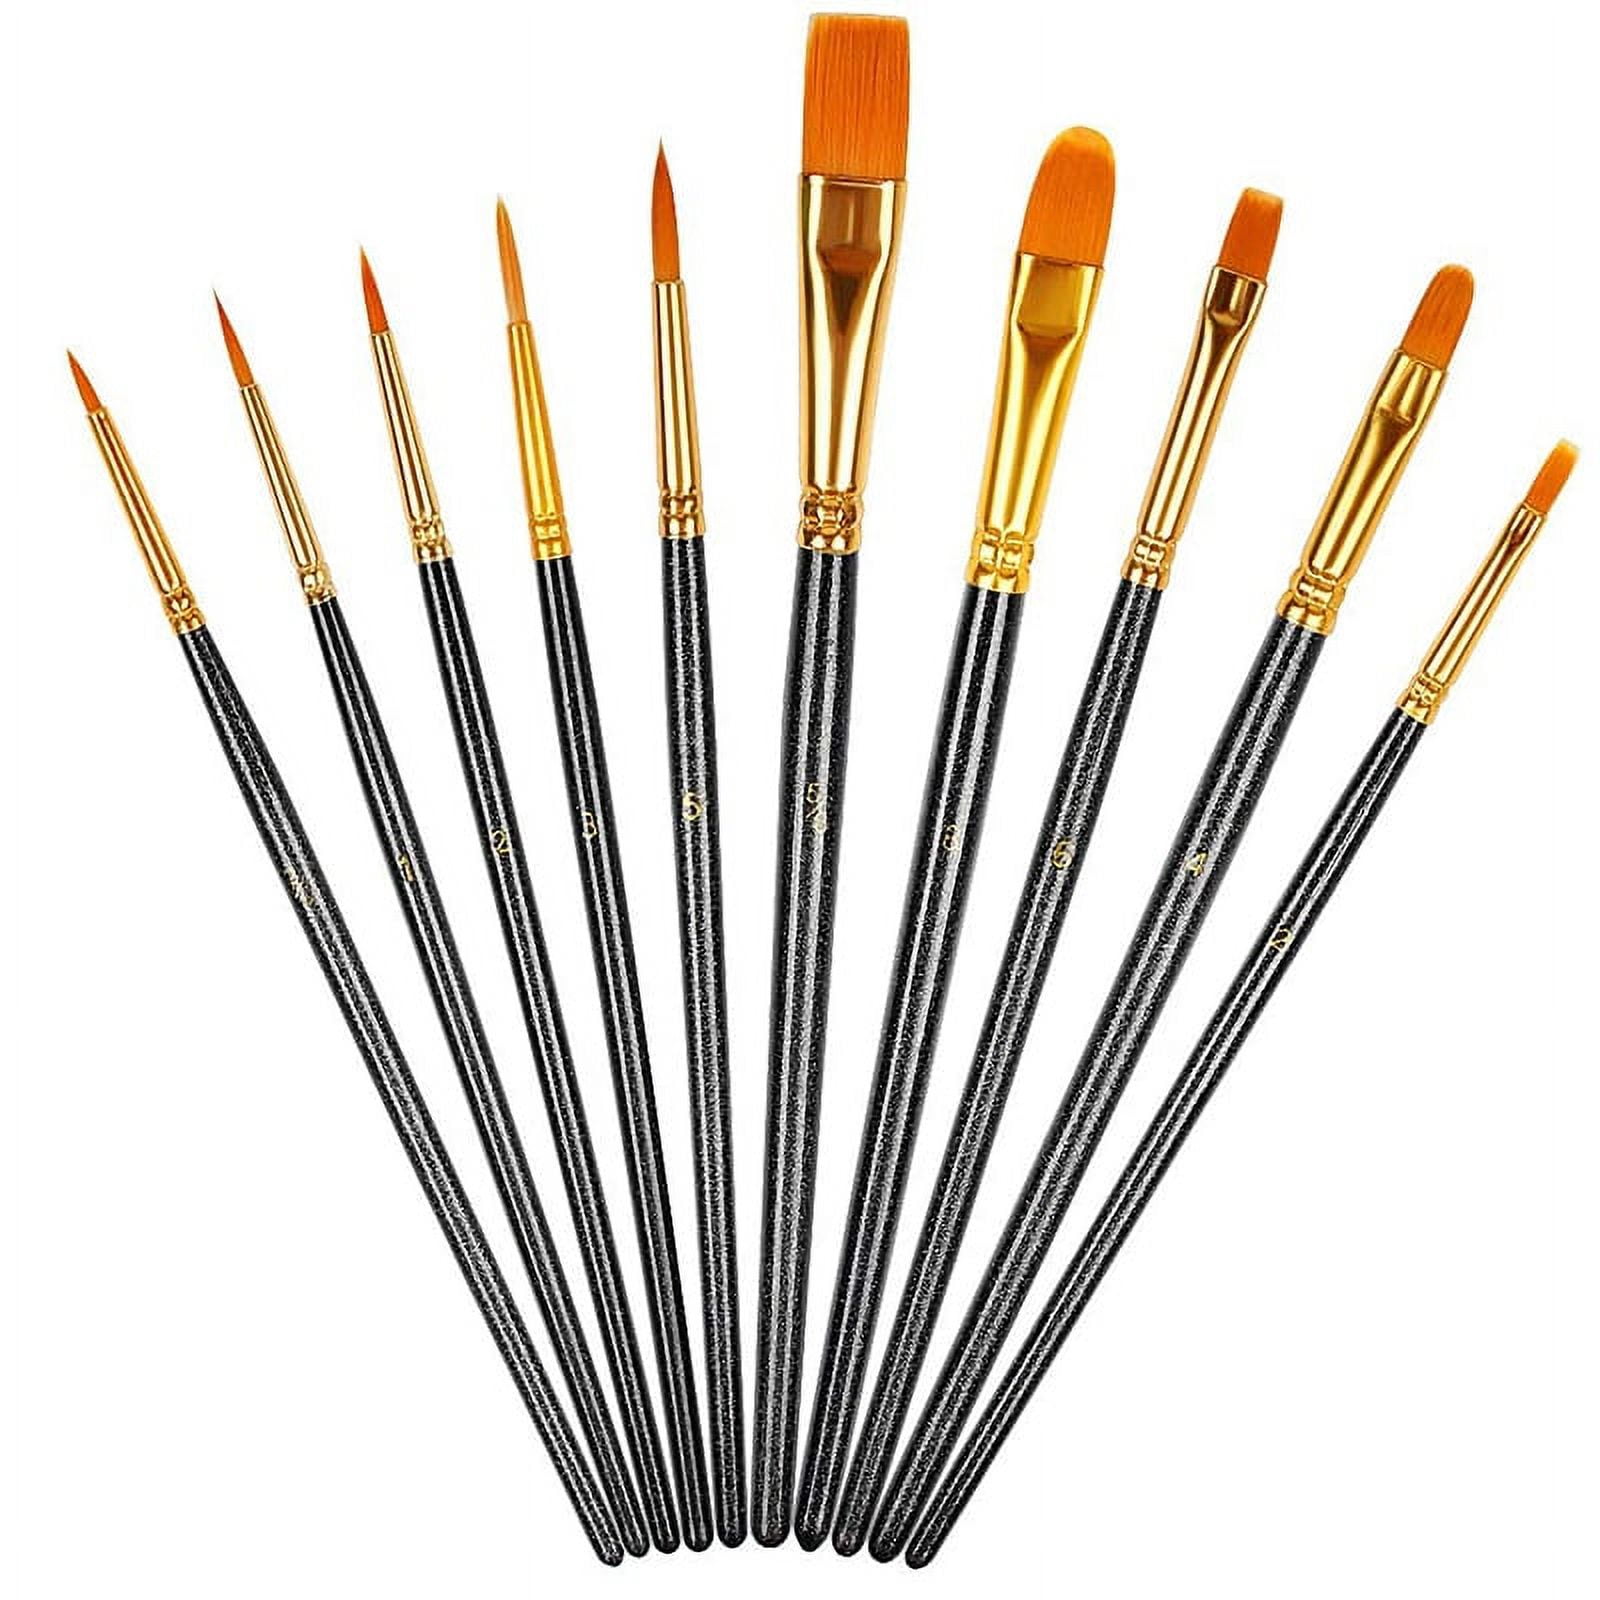 Acrylic Paint Brushes Set, 12pcs Professional Round-Pointed Tip Artist Paintbrushes for Acrylic Watercolor Oil Painting, Face Body Nail Art, Crafts, C